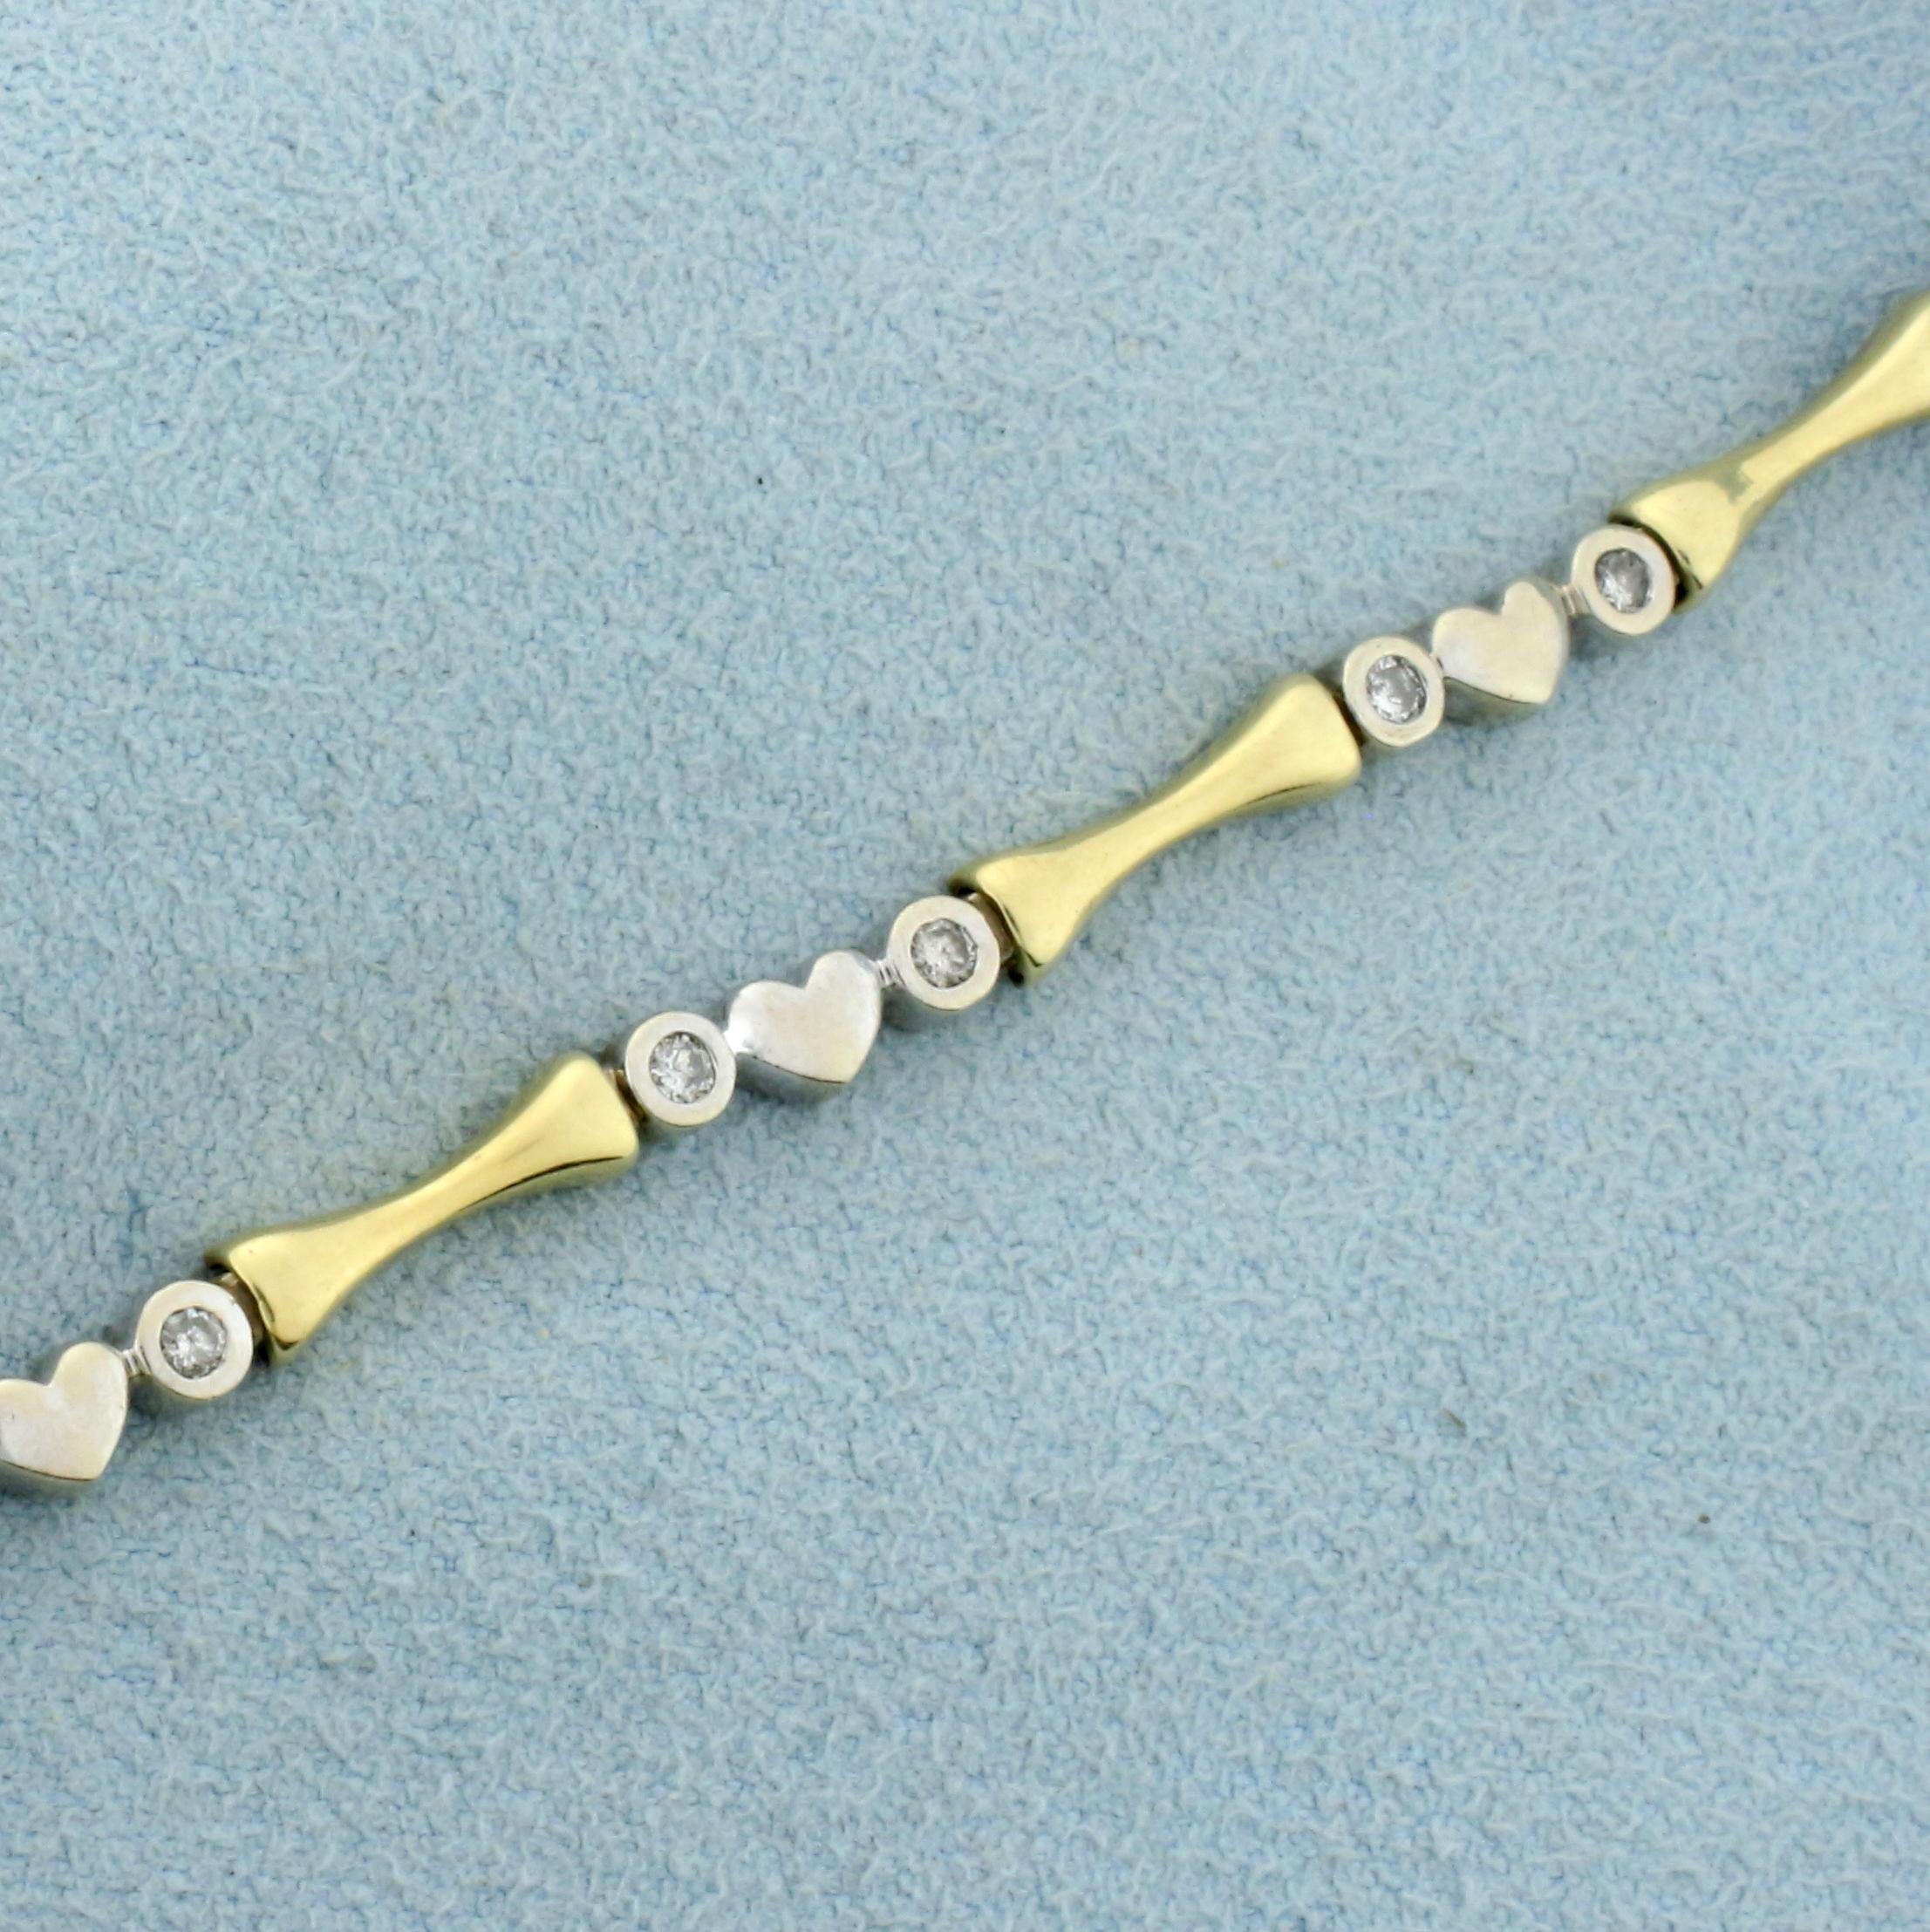 Diamond Heart And Bar Link Bracelet In 14k Yellow And White Gold